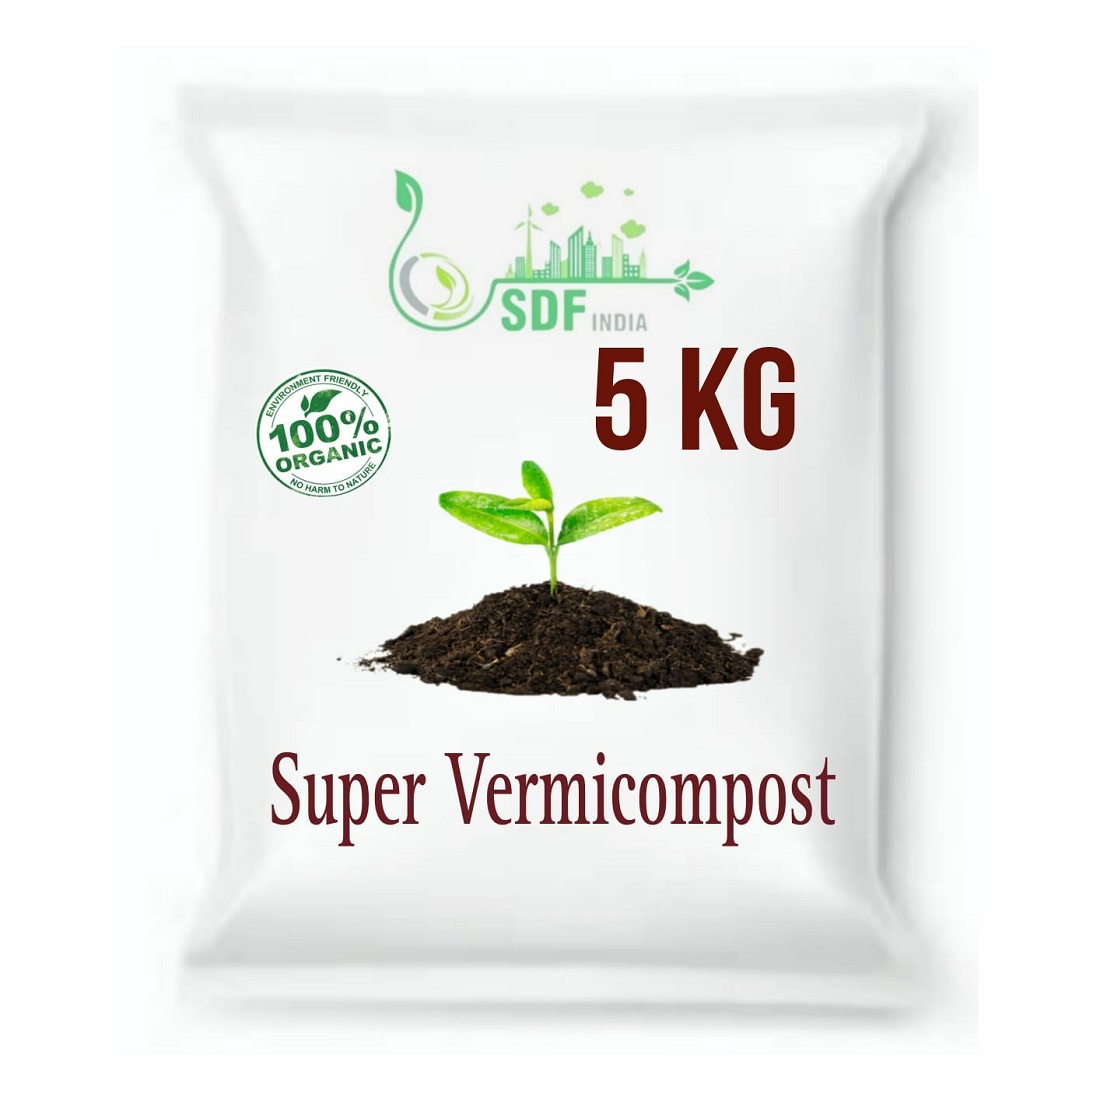 SDF India Super Vermicompost for All Kinds of Plants Complete Food for The Soil, Enriched with, Organic (5KG)